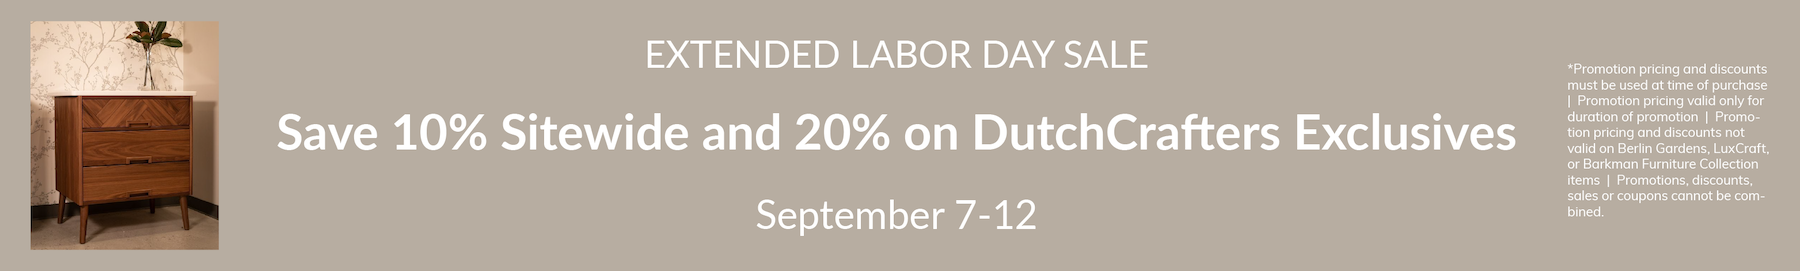 Extended Labor Day Sitewide Sale